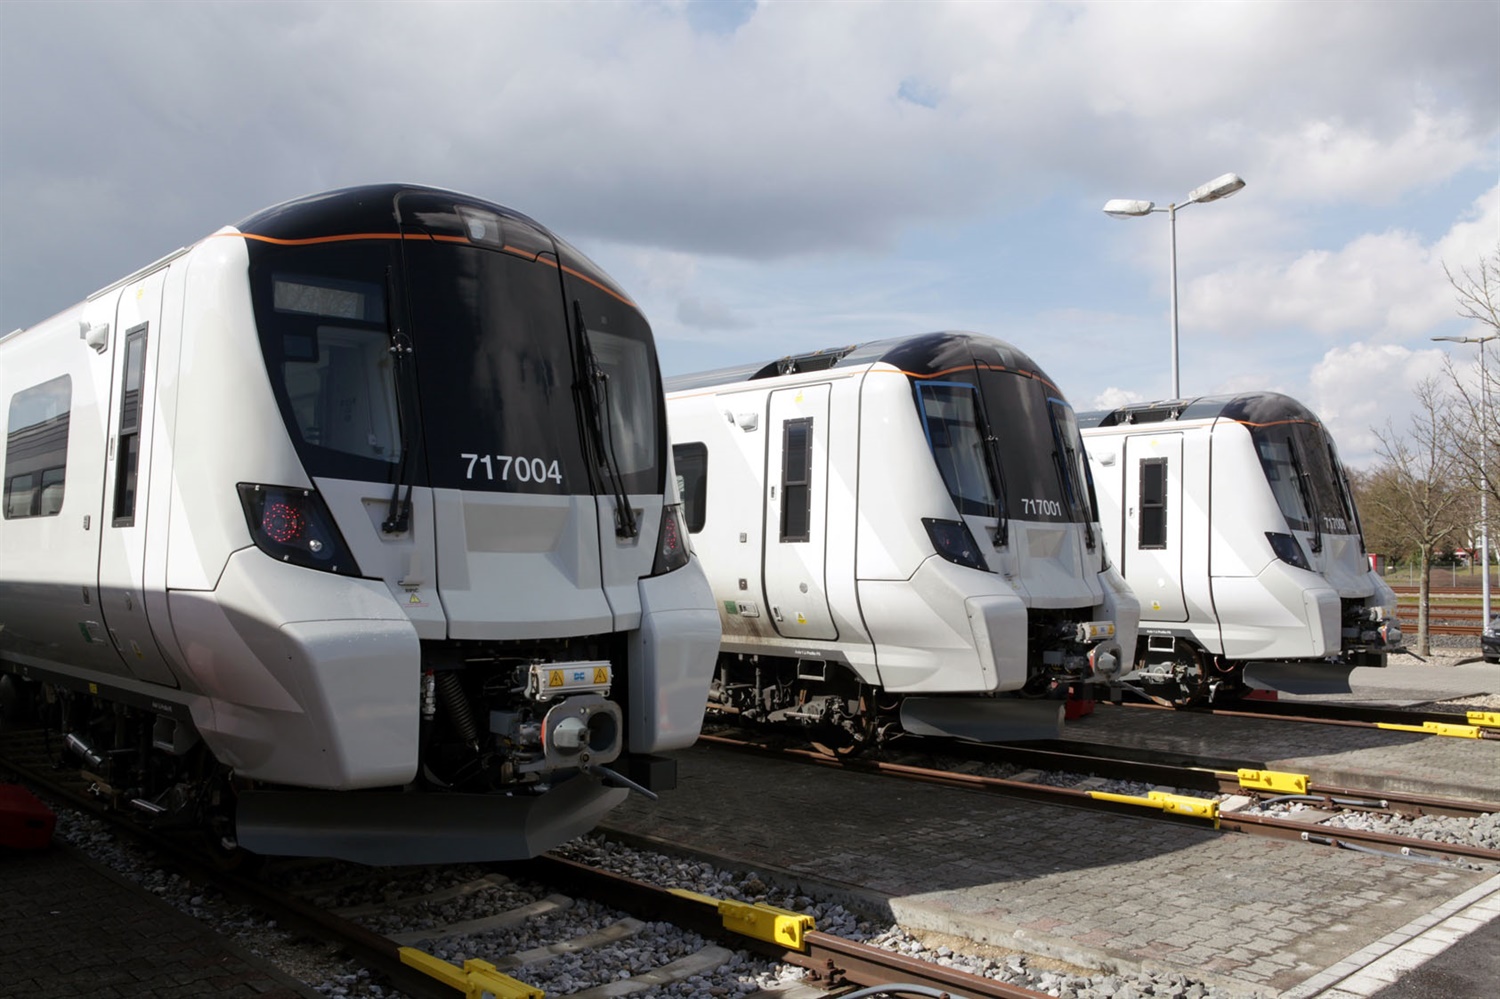 Brand-new £200m Class 717s undergo testing ahead of autumn roll-out